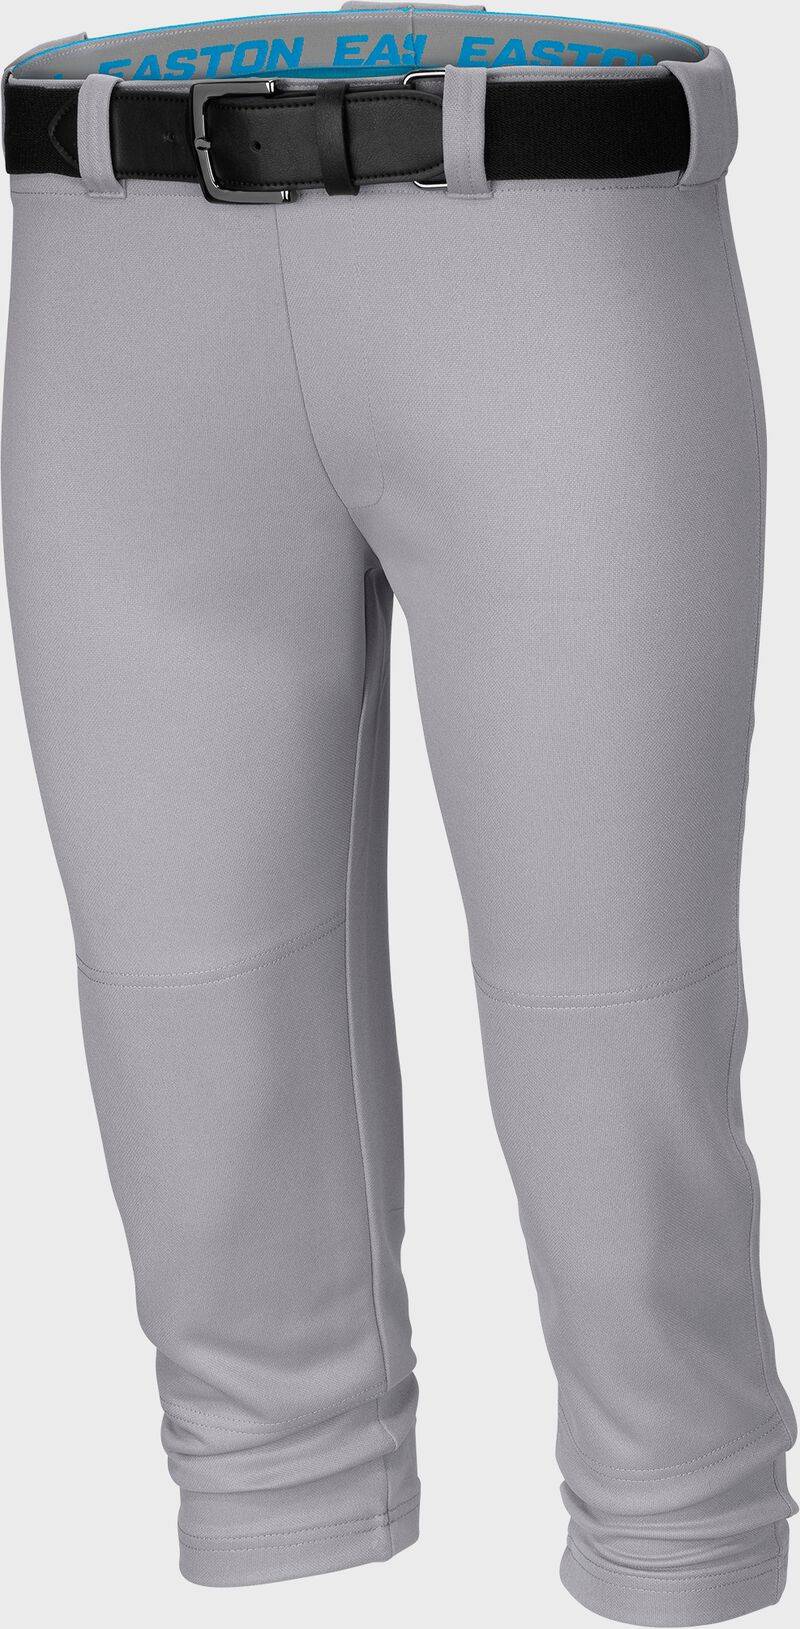 Load image into Gallery viewer, New Easton Youth Zone2 Softball Pants Grey Size Large
